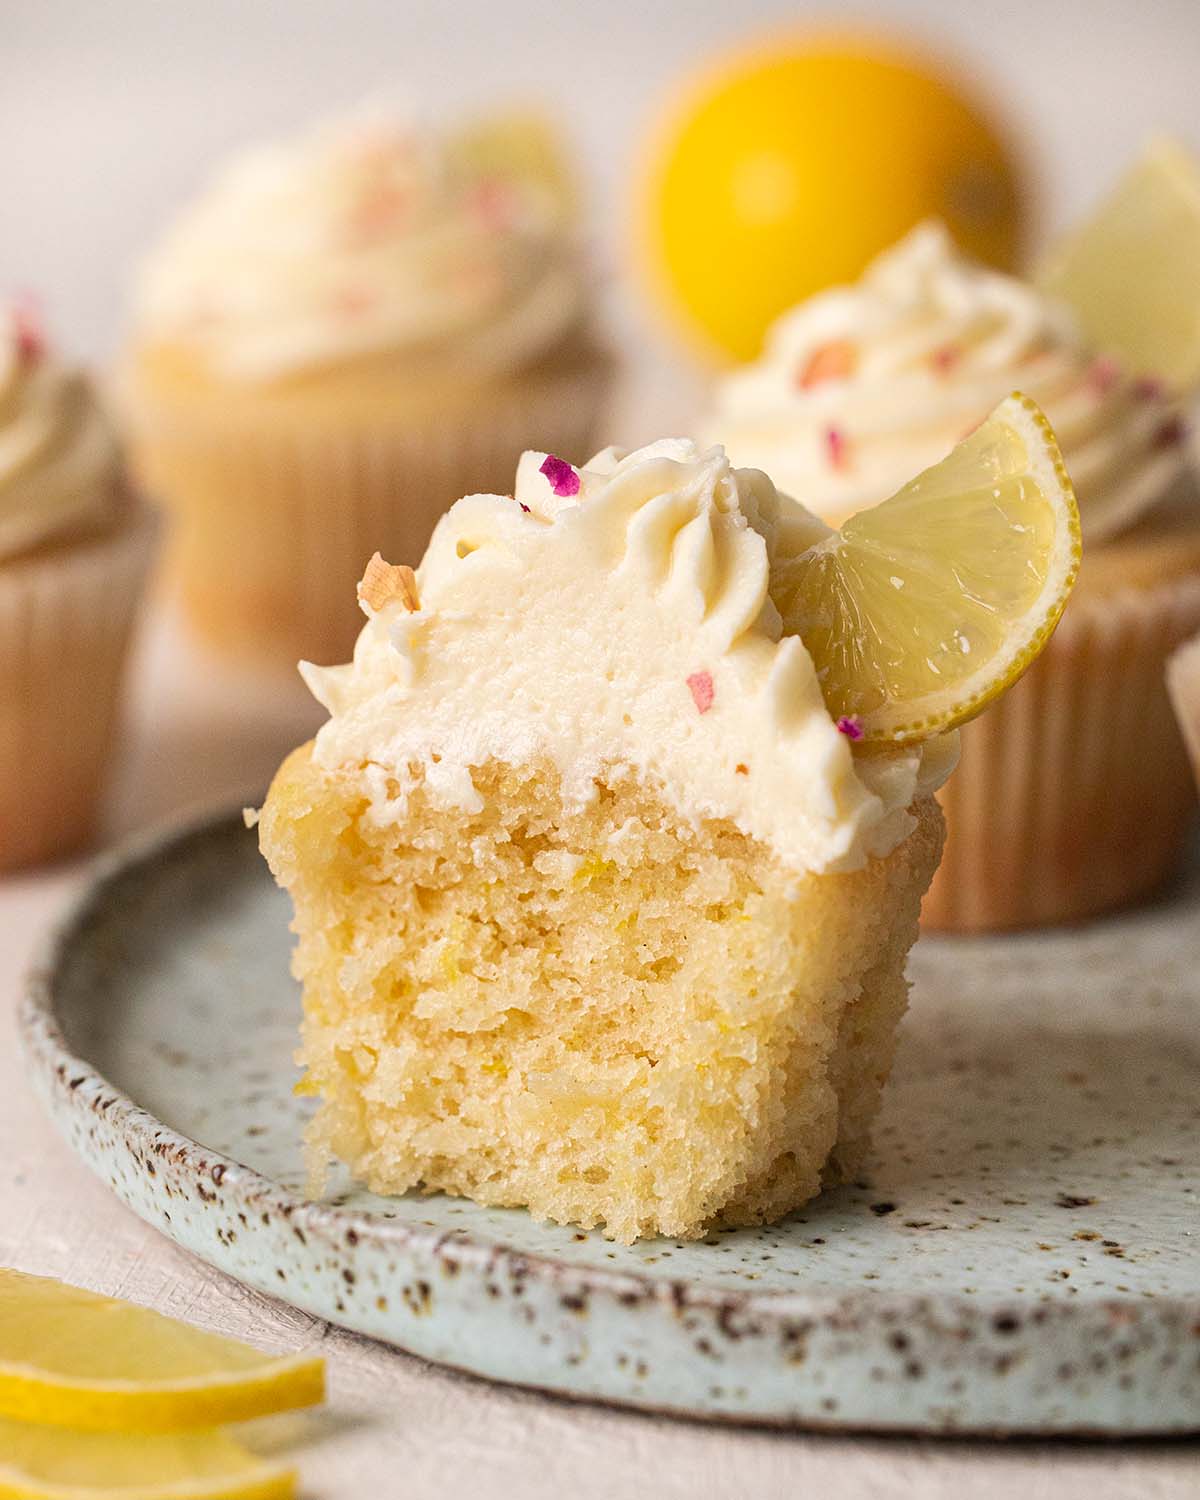 Close up of lemon cupcake with bite taken out showing texture of cupcake and frosting.